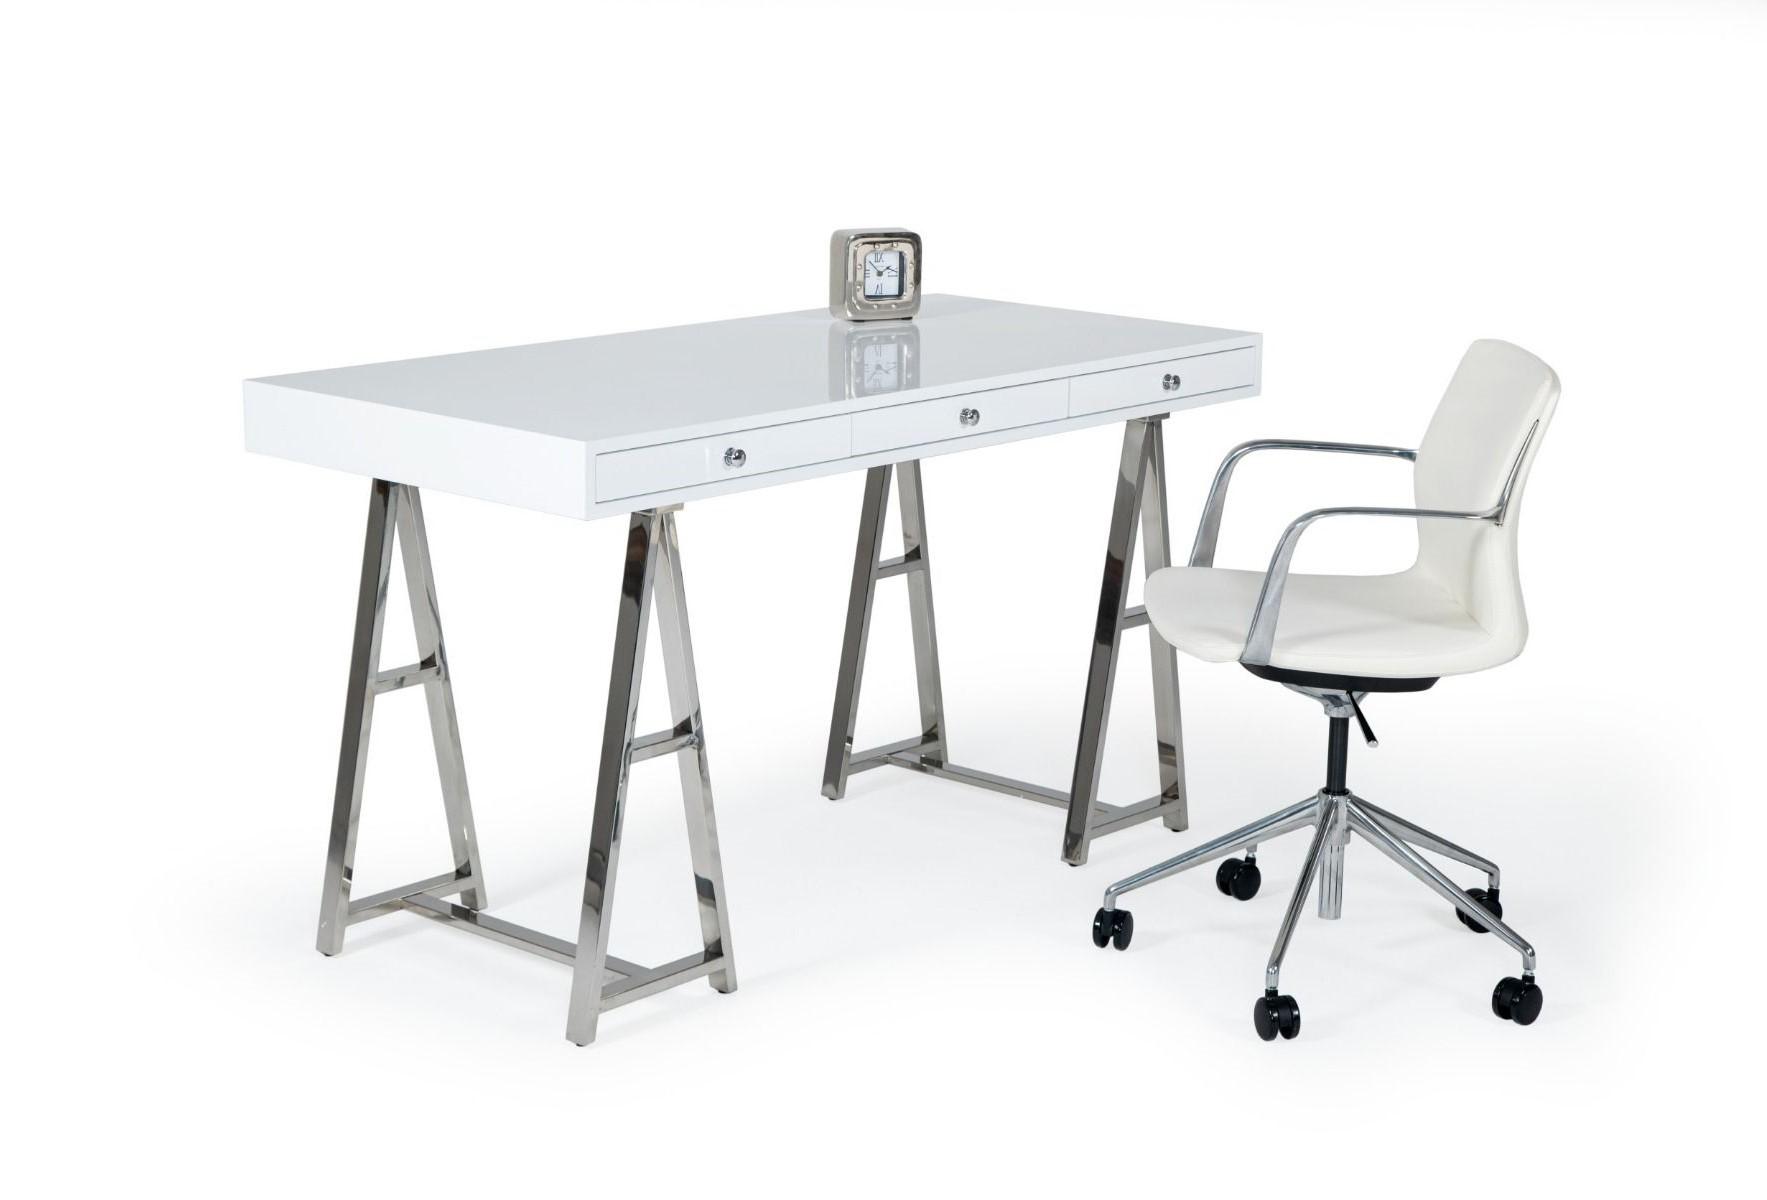 Contemporary, Modern Desk with Chair Ostrow Sundar VGGMCP-705E-WHT-DSK-2pcs in Chrome, White Leatherette